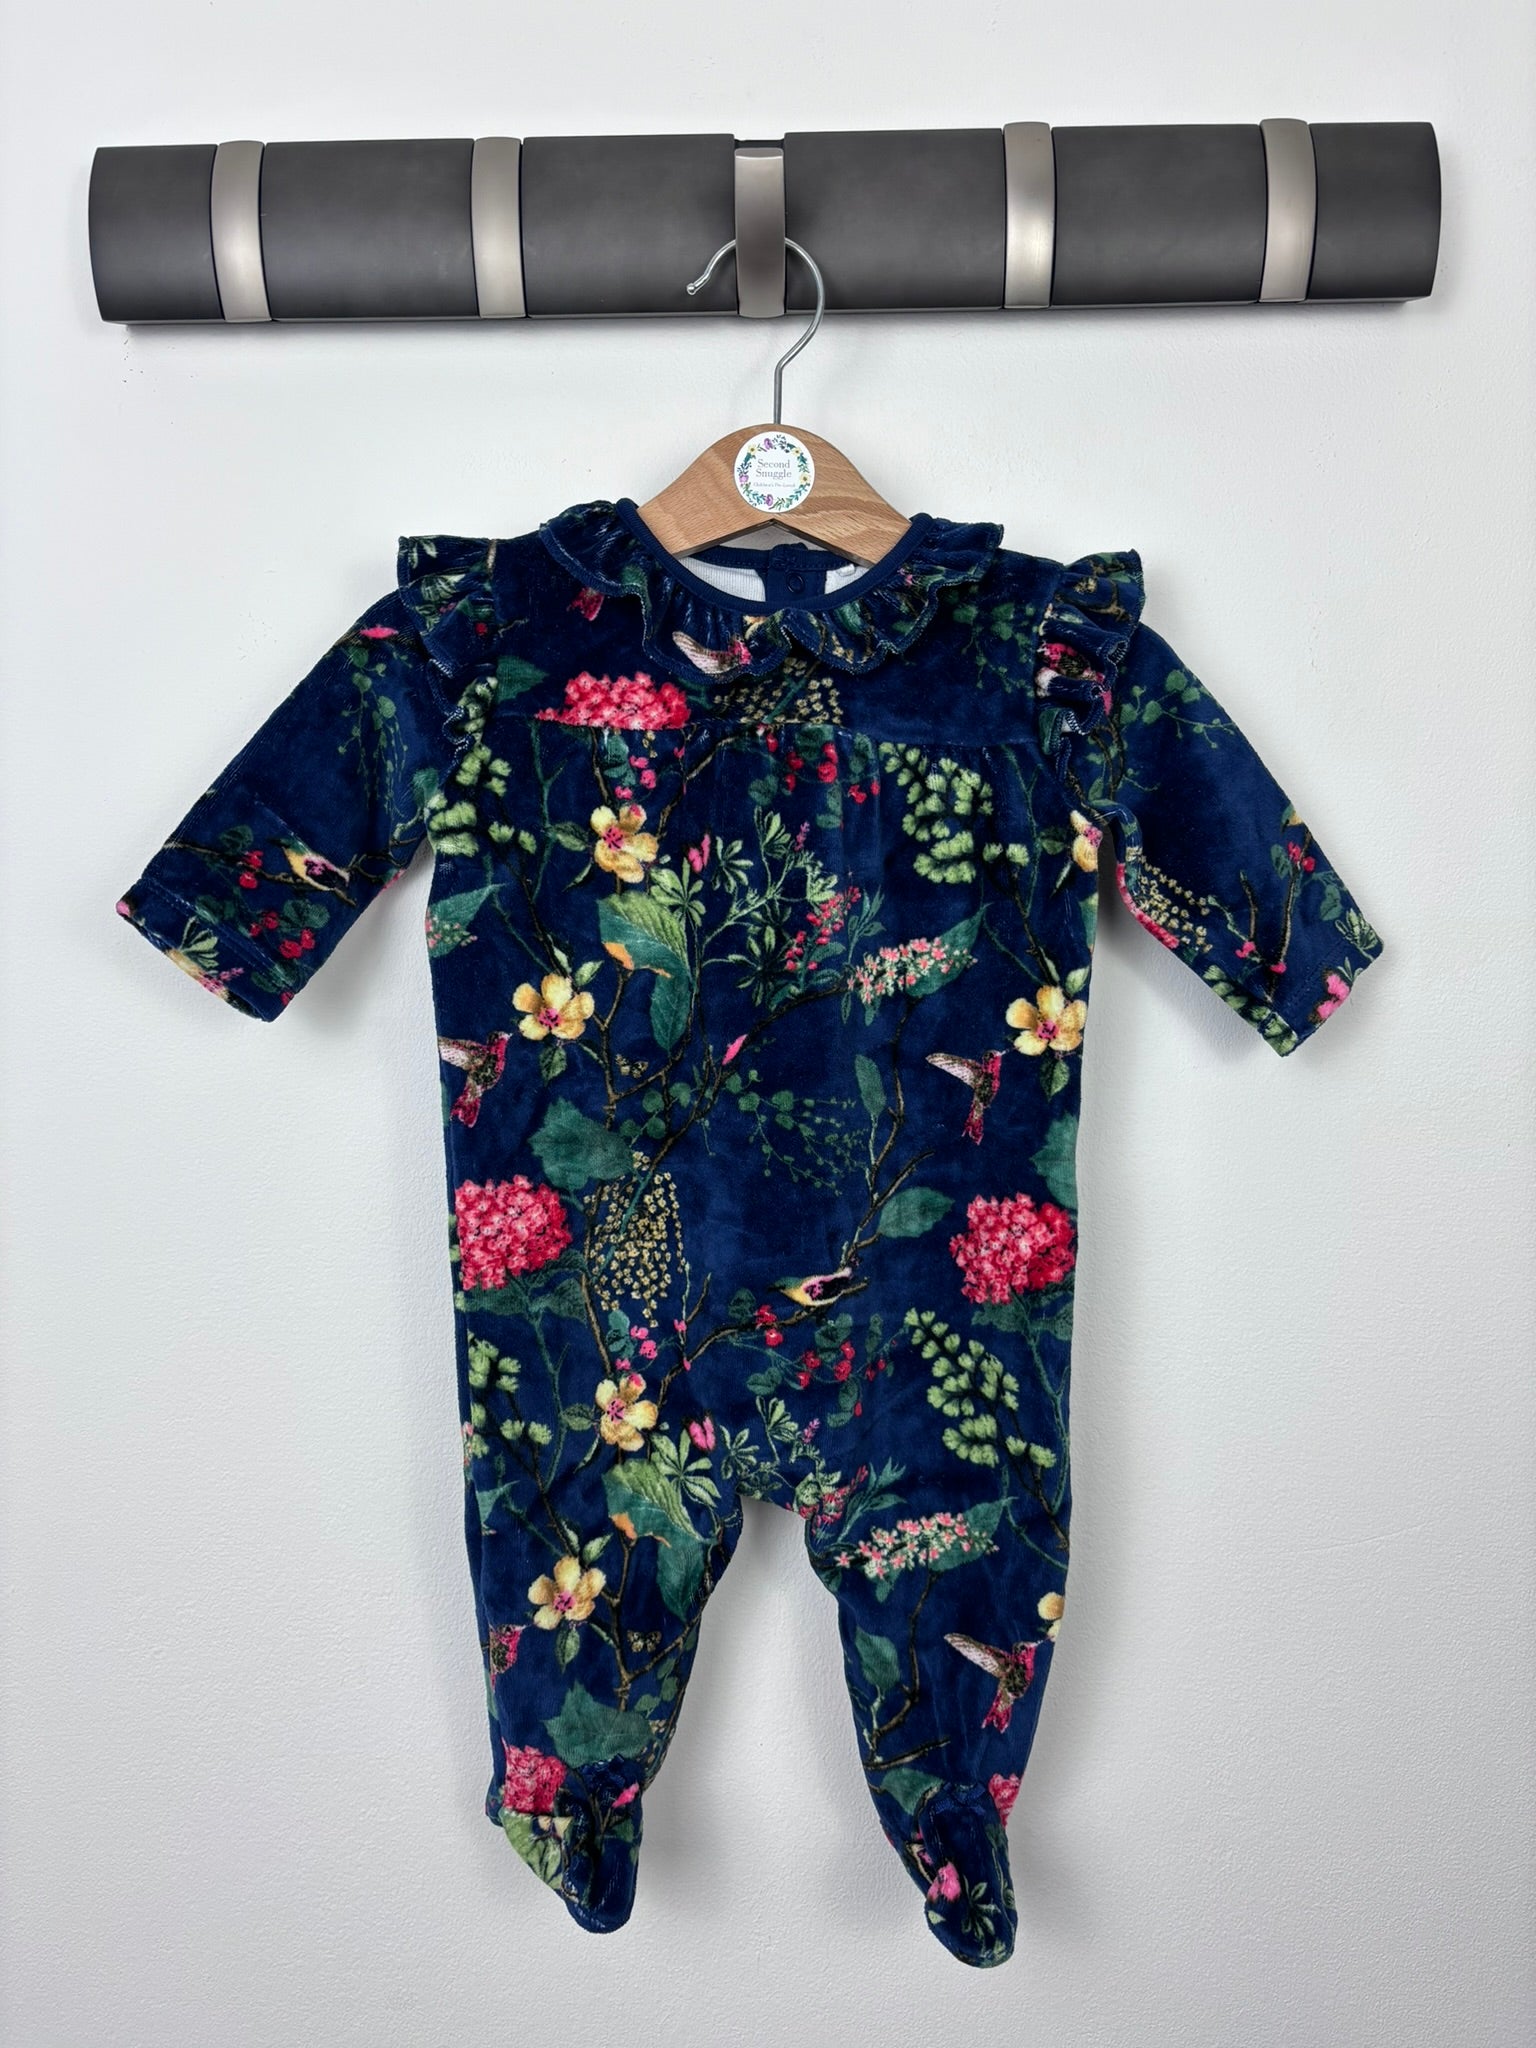 Next Up To 3 Months-Sleepsuits-Second Snuggle Preloved